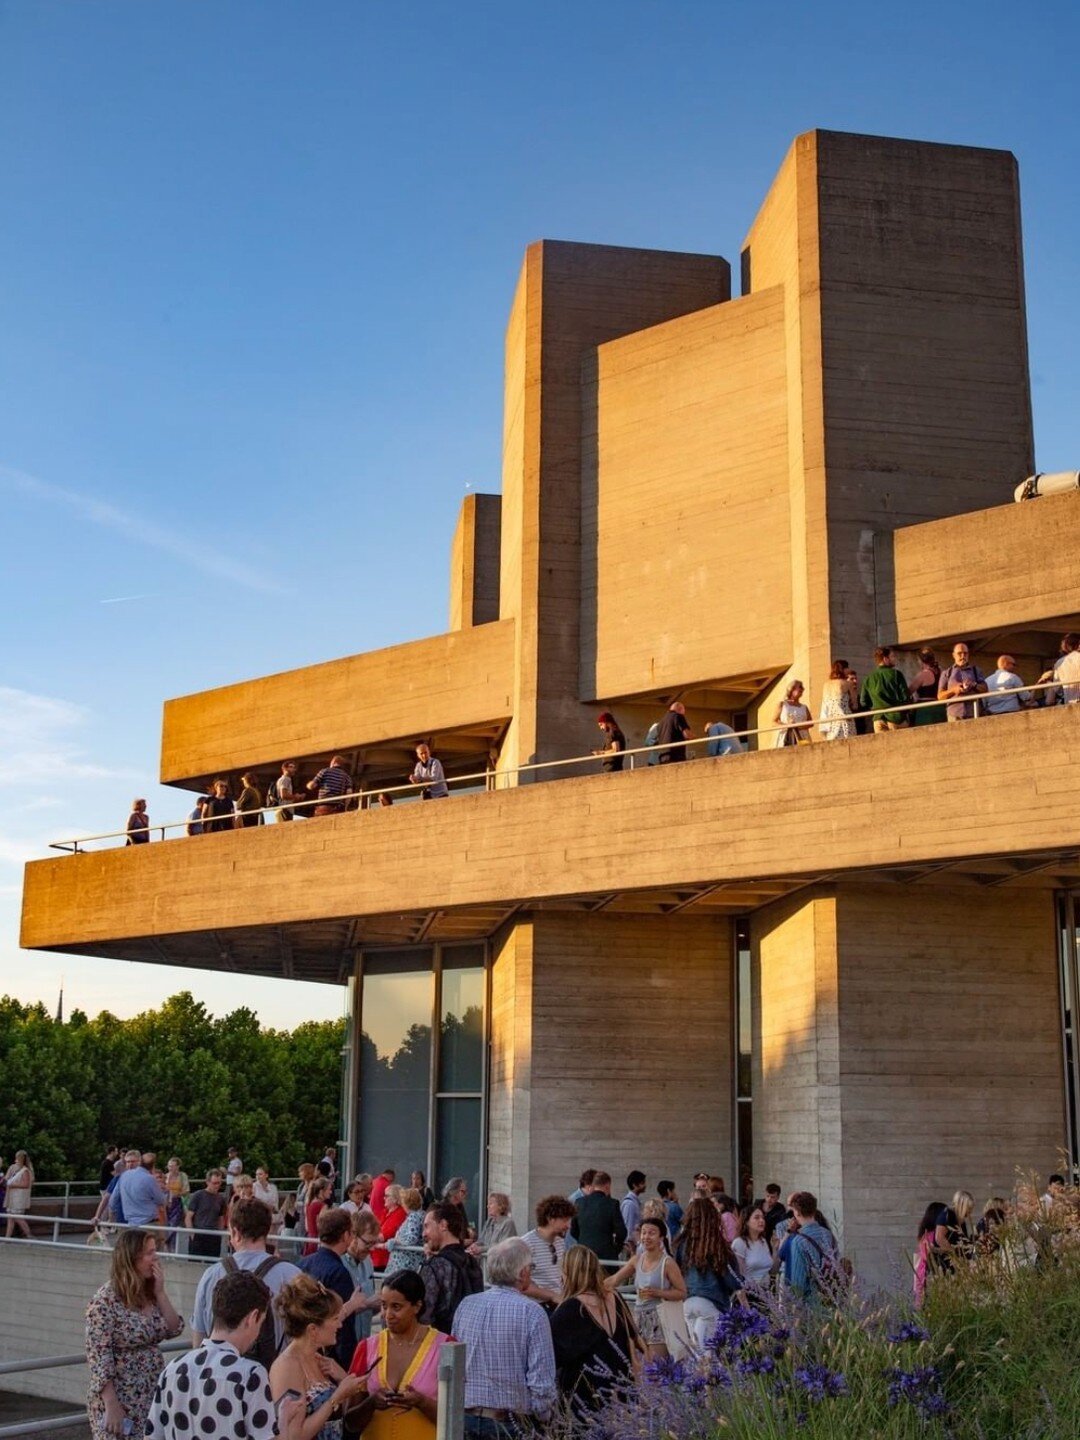 Next week's weather forecast is 100% our type on paper...

Stretch out with the family on our spacious South Bank terrace and we'll take care of the rest ☀️

📸@nationaltheatre
#lagambalondon